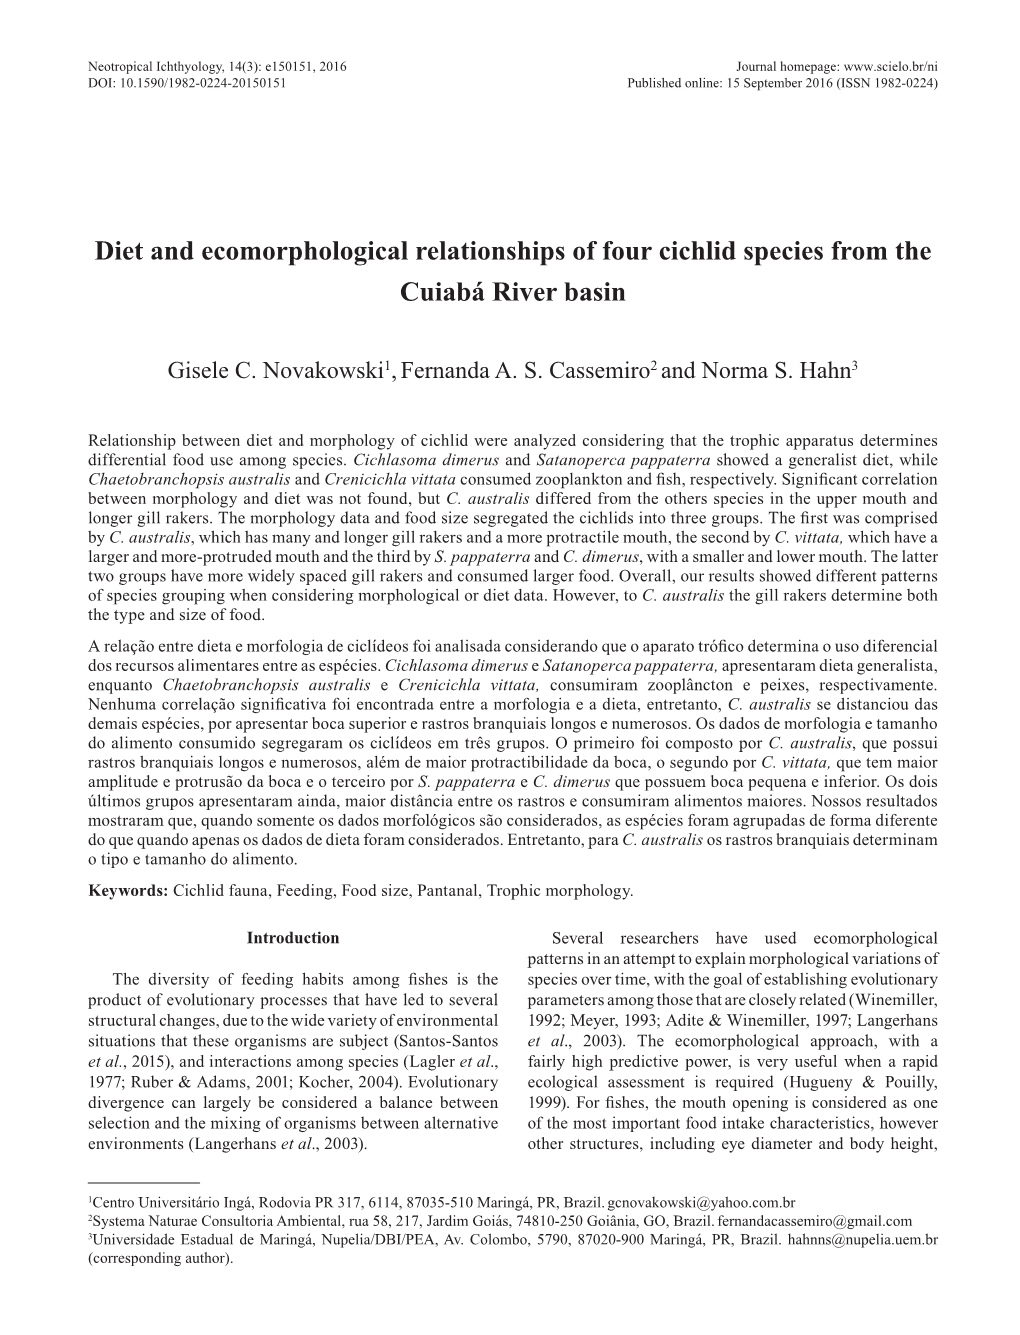 Diet and Ecomorphological Relationships of Four Cichlid Species from the Cuiabá River Basin